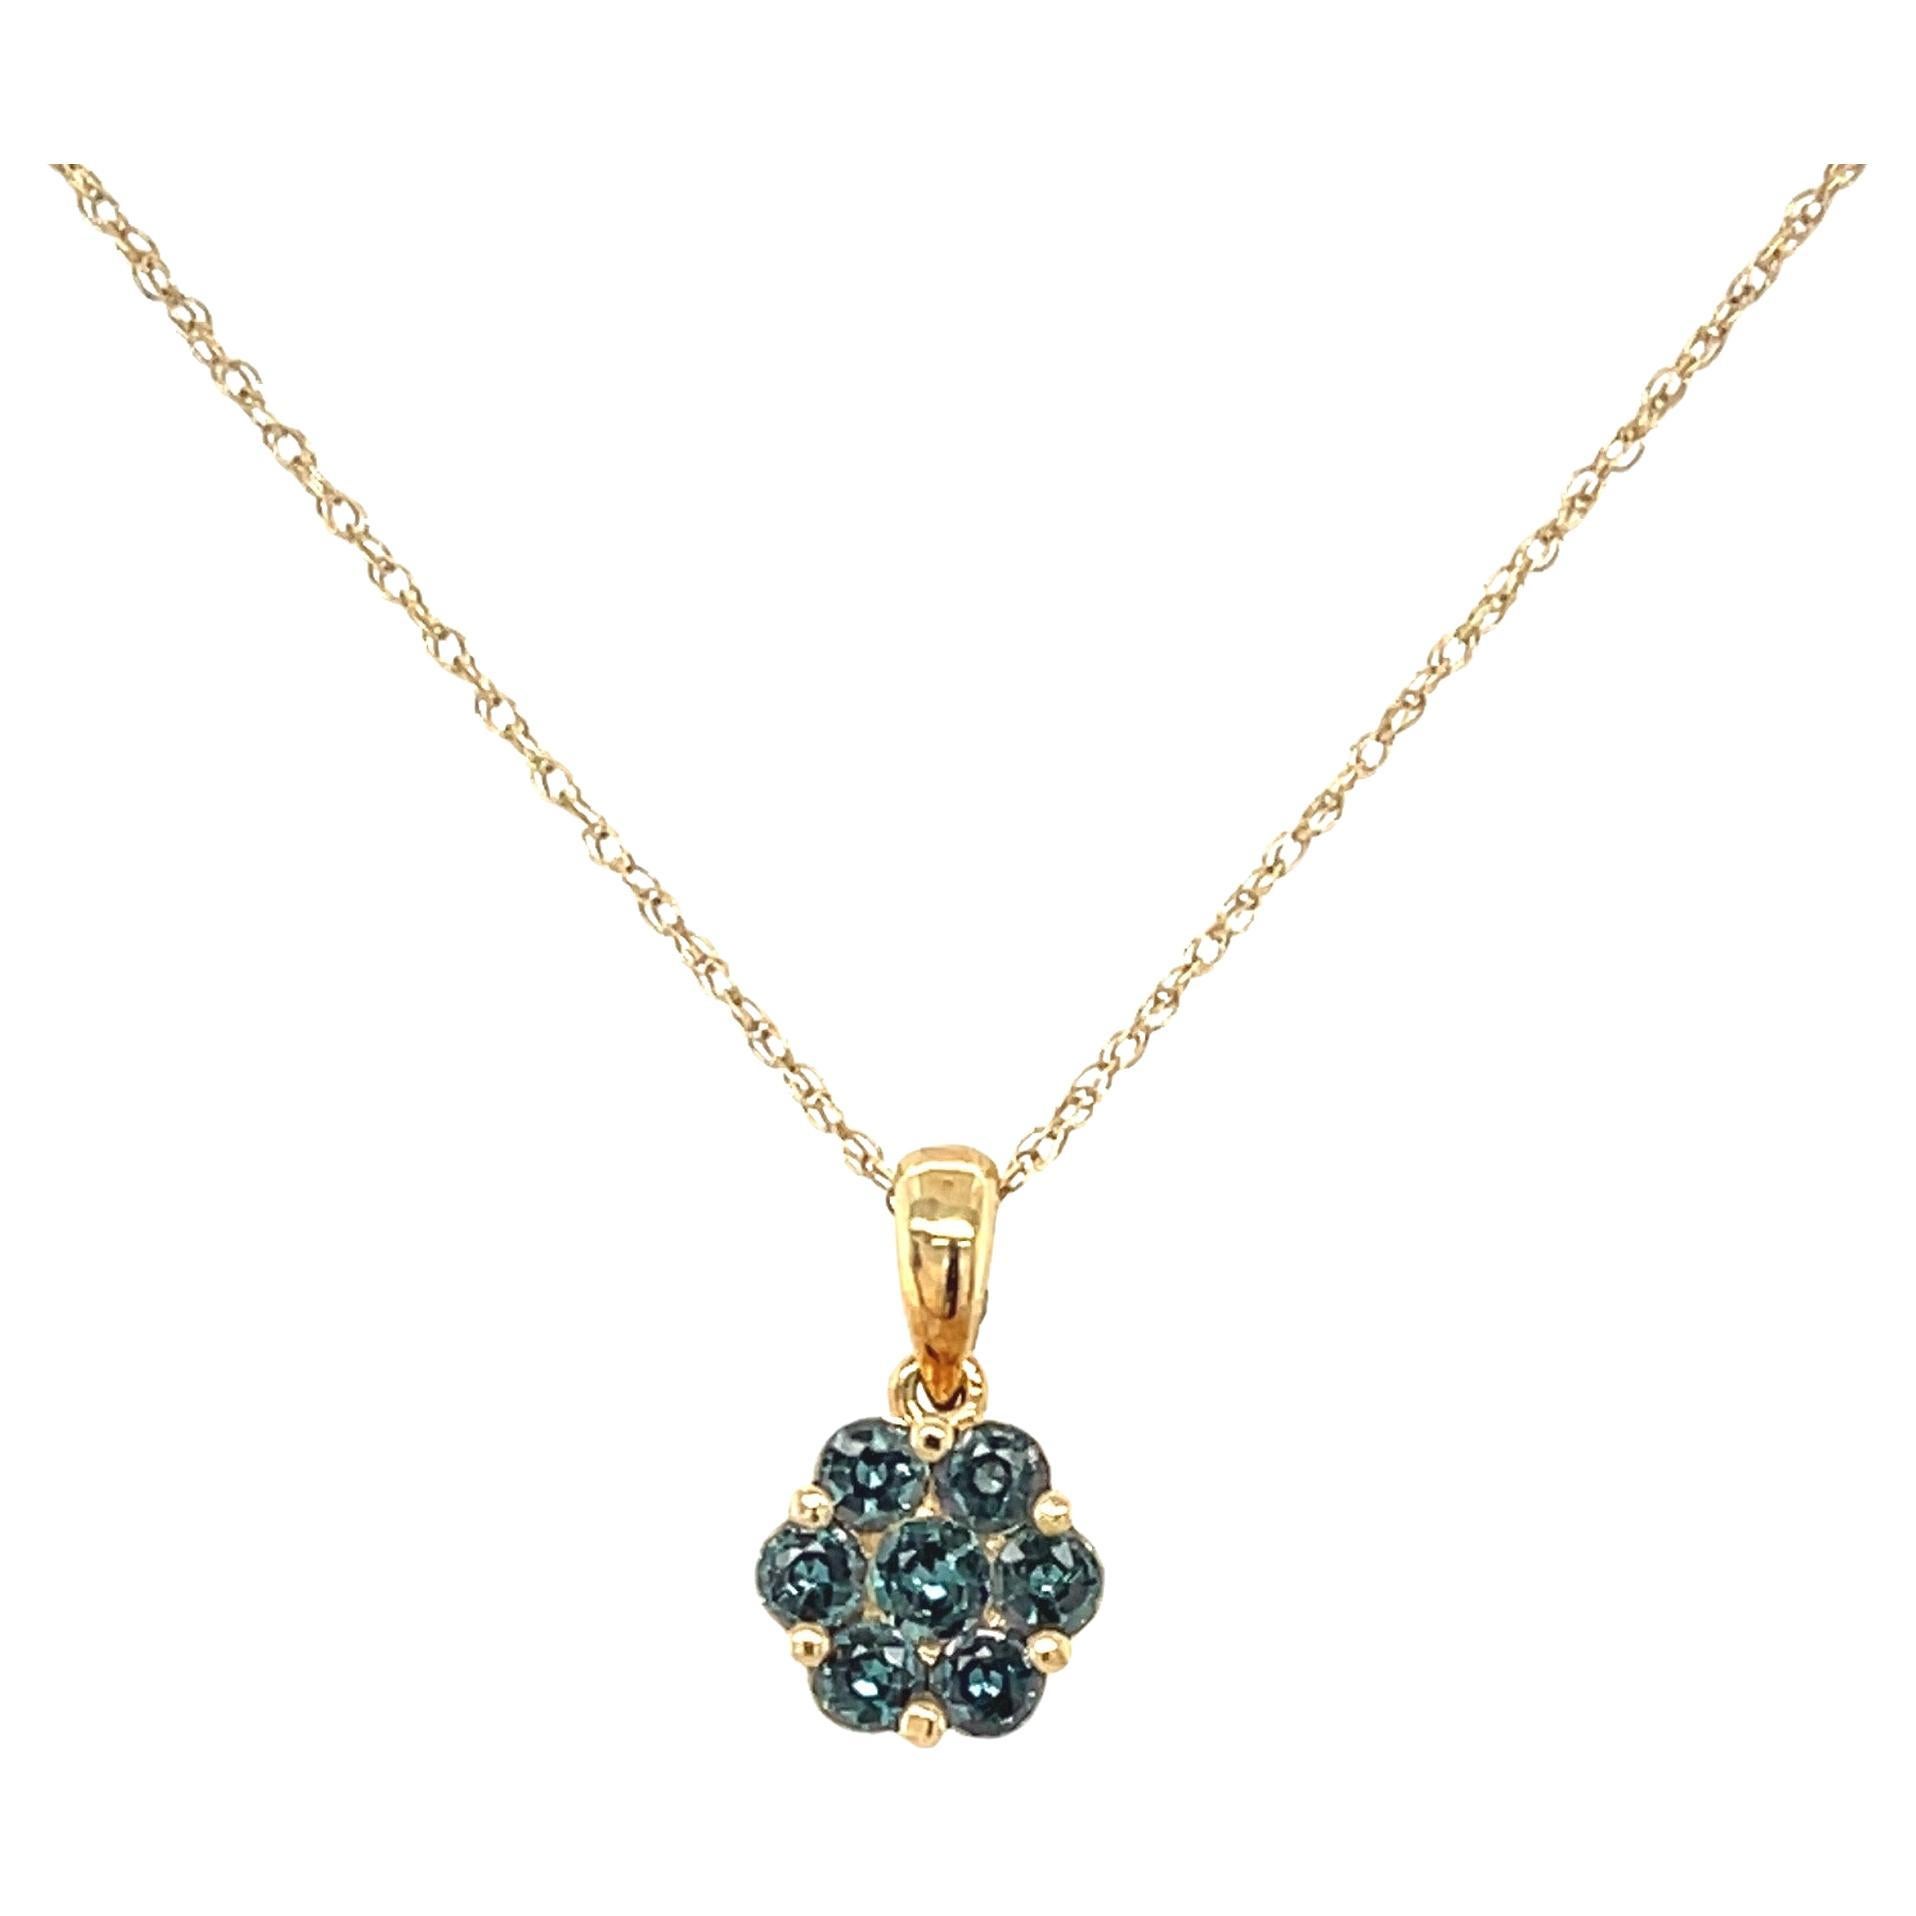 Alexandrite Floral Cluster Pendant Necklace, .57 Carat Total in 14k Yellow Gold 